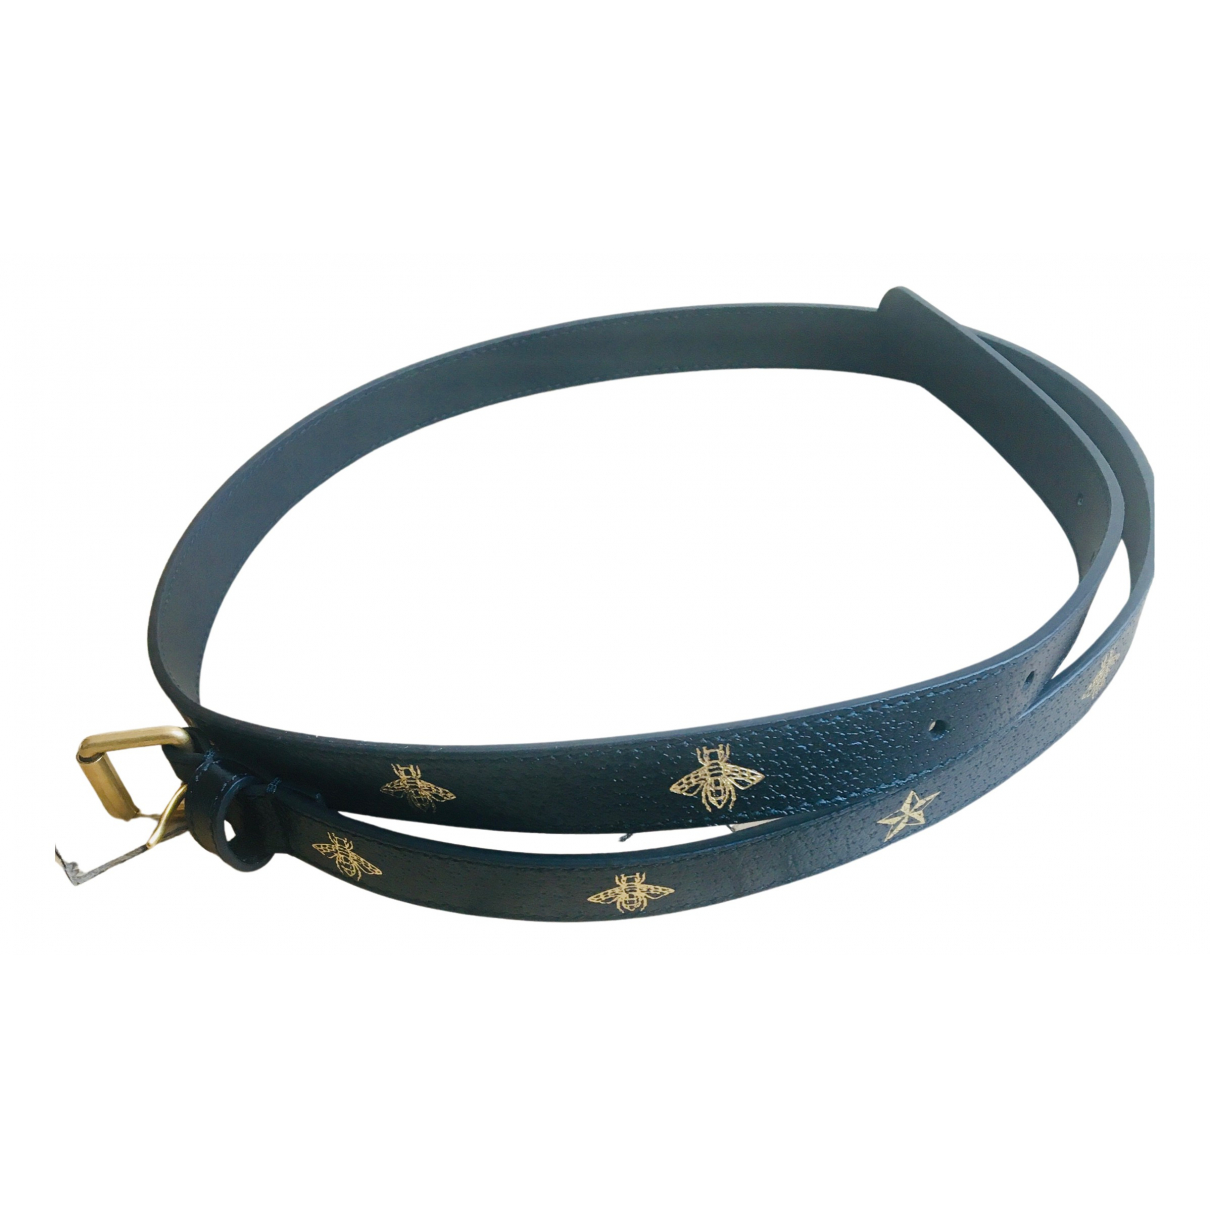 Leather belt Memphis Mall Max 89% OFF